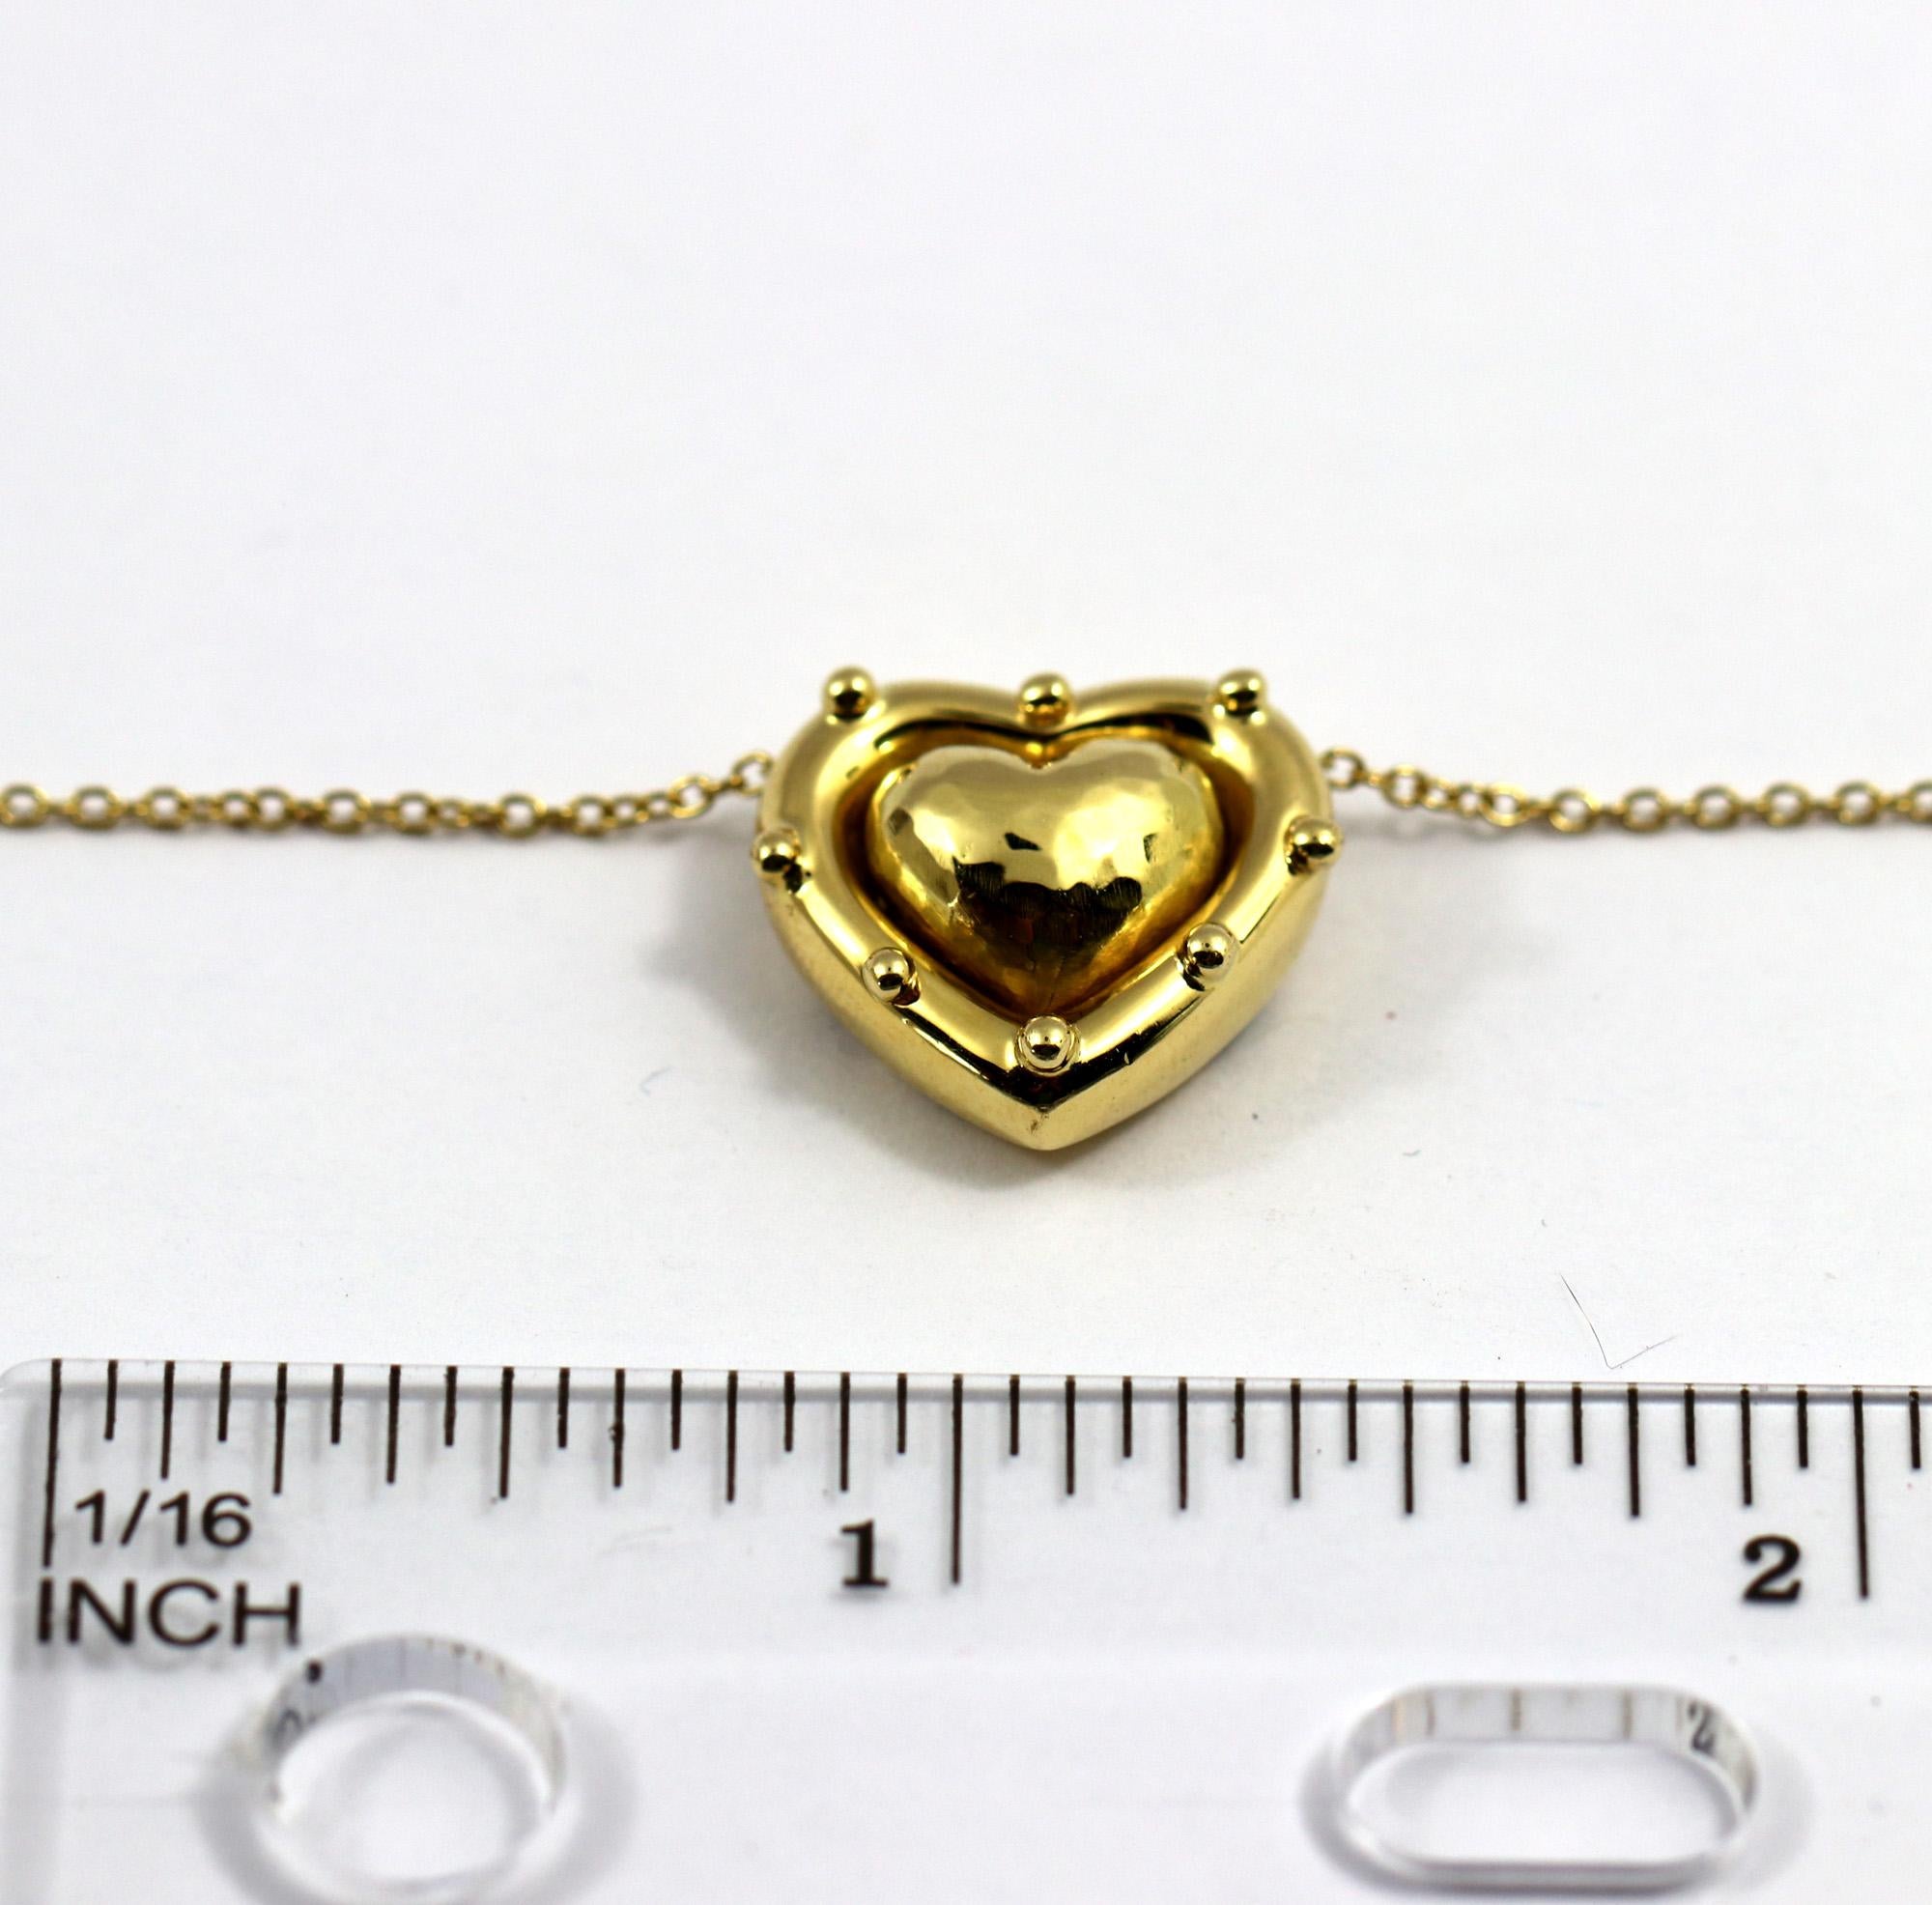 Tiffany & Co. Puffed Heart Pendant on Gold Chain 1